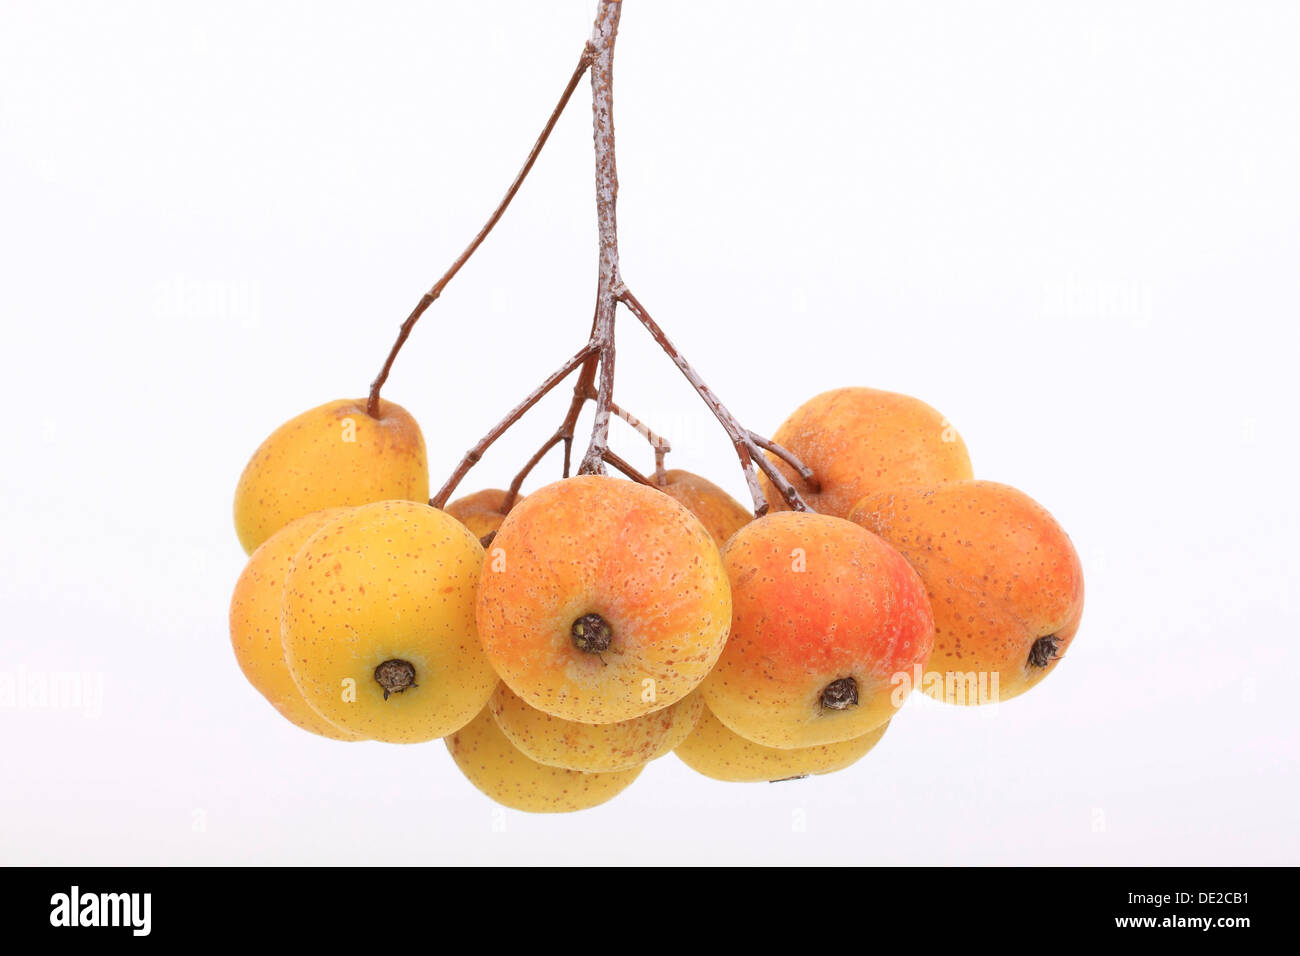 Service tree (Sorbus domestica), fruit umbel, important ingredient for the production of cider Stock Photo